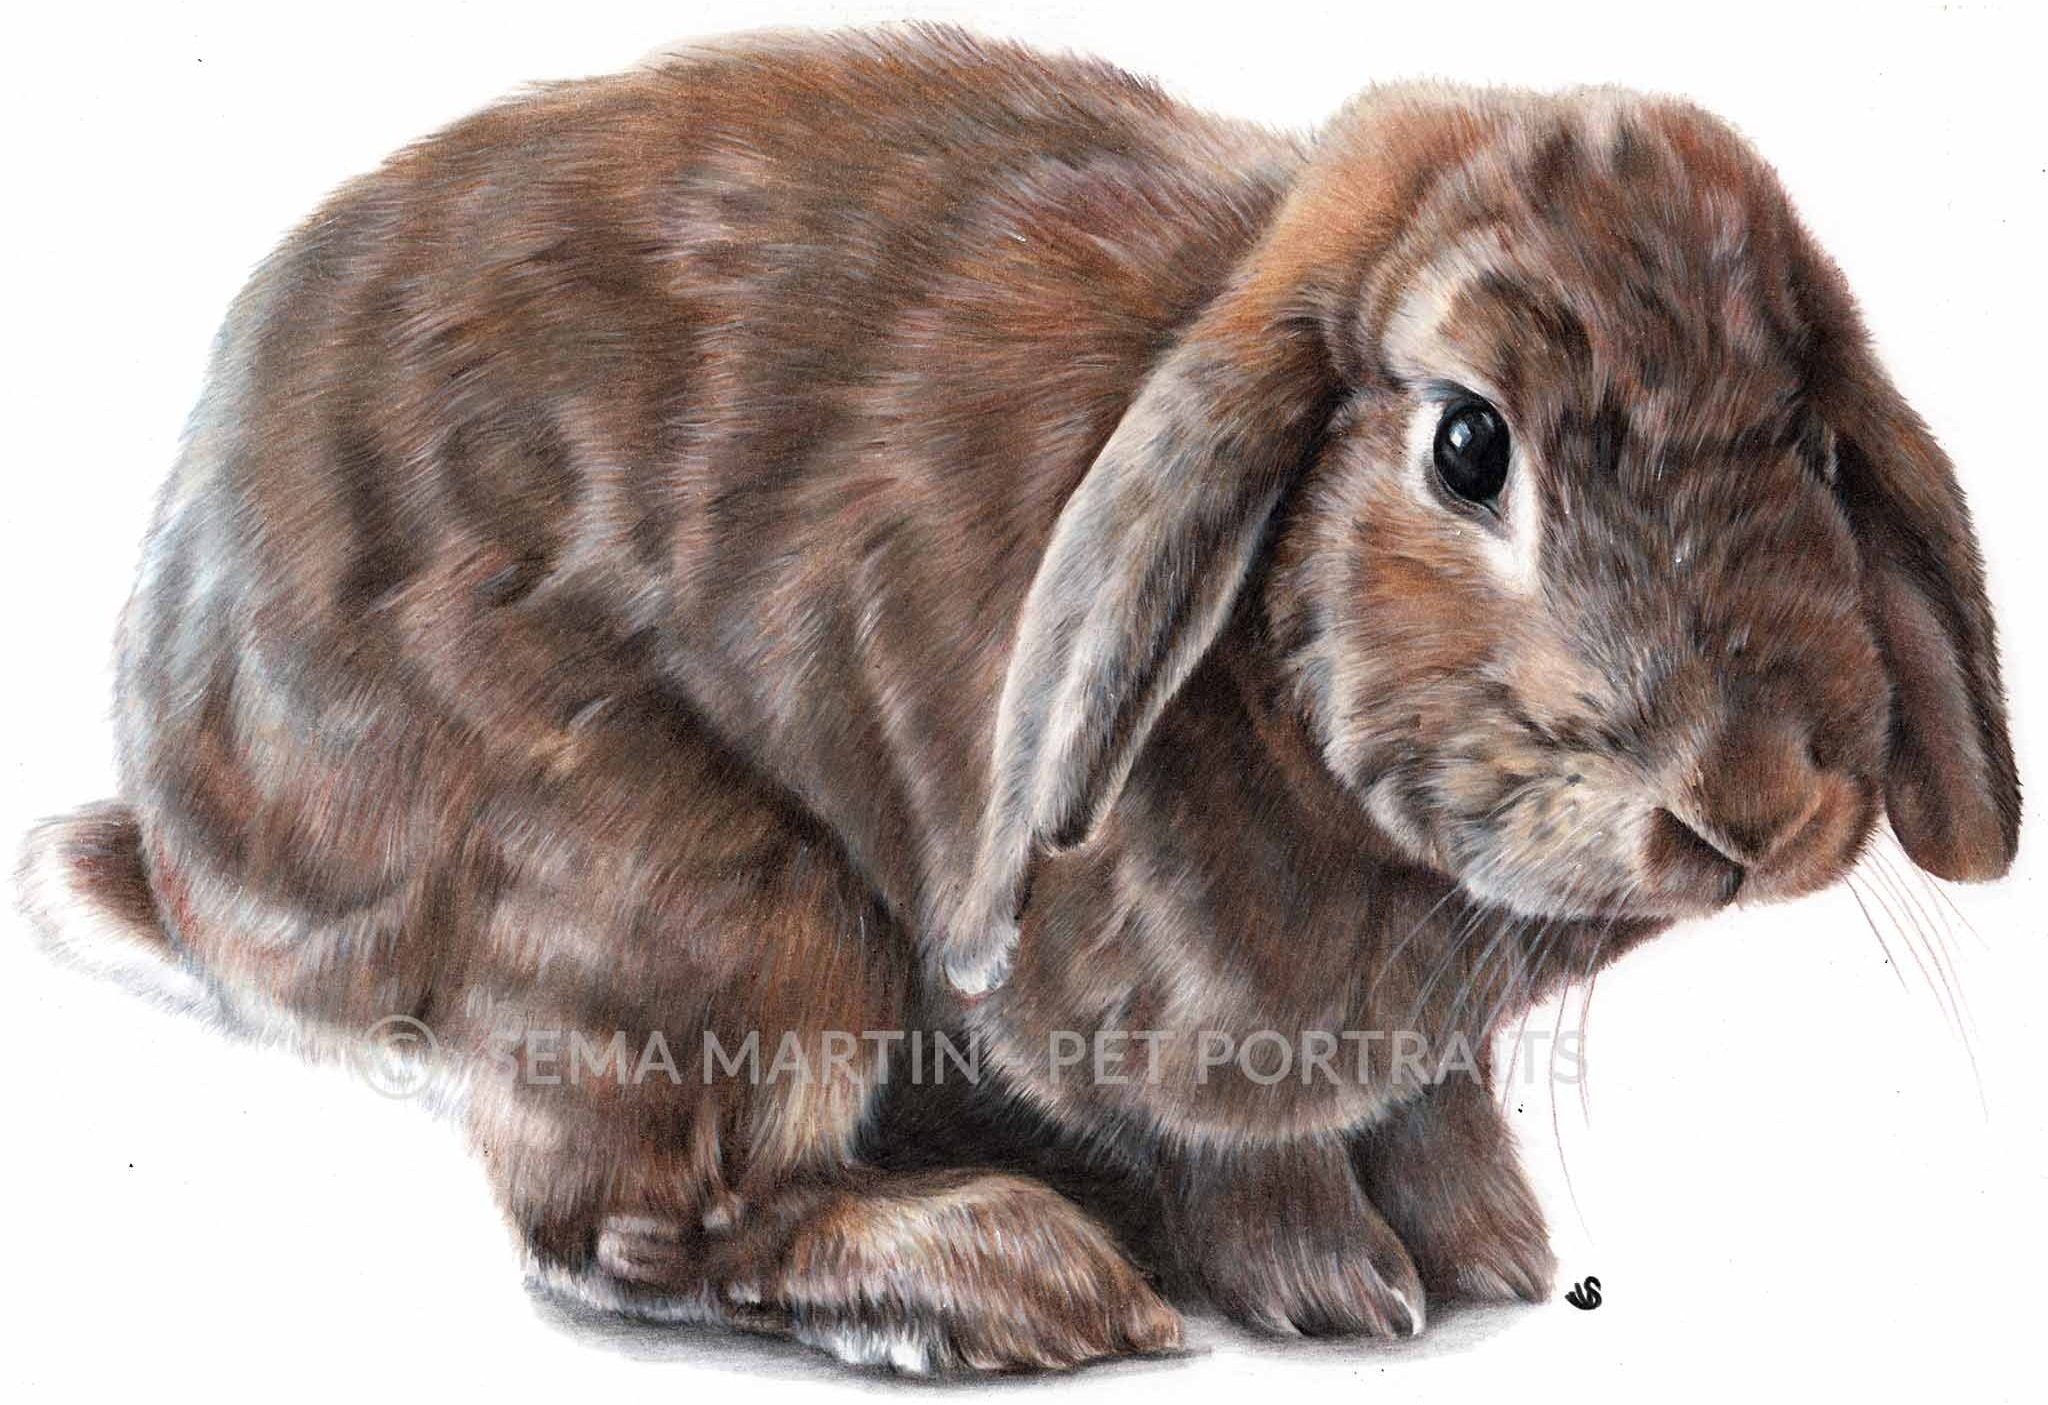 Realistic Custom Colour Pencil Memorial Drawing Commission of a brown bunny rabbit from a photo in Cardiff UK by Pet Portrait Artist Sema Martin (Copy)